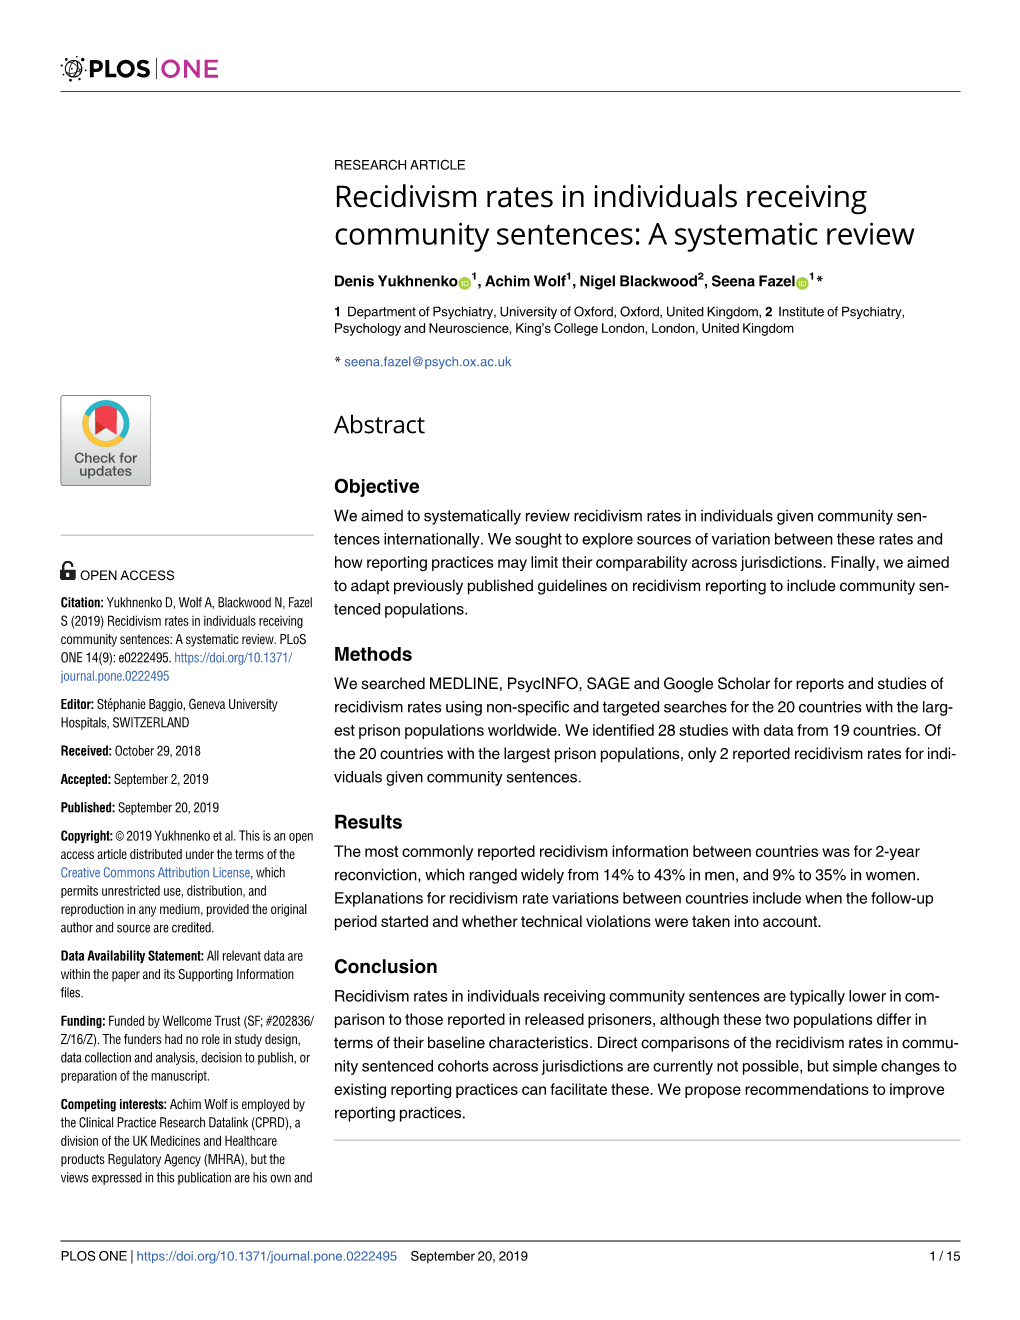 Recidivism Rates in Individuals Receiving Community Sentences: a Systematic Review